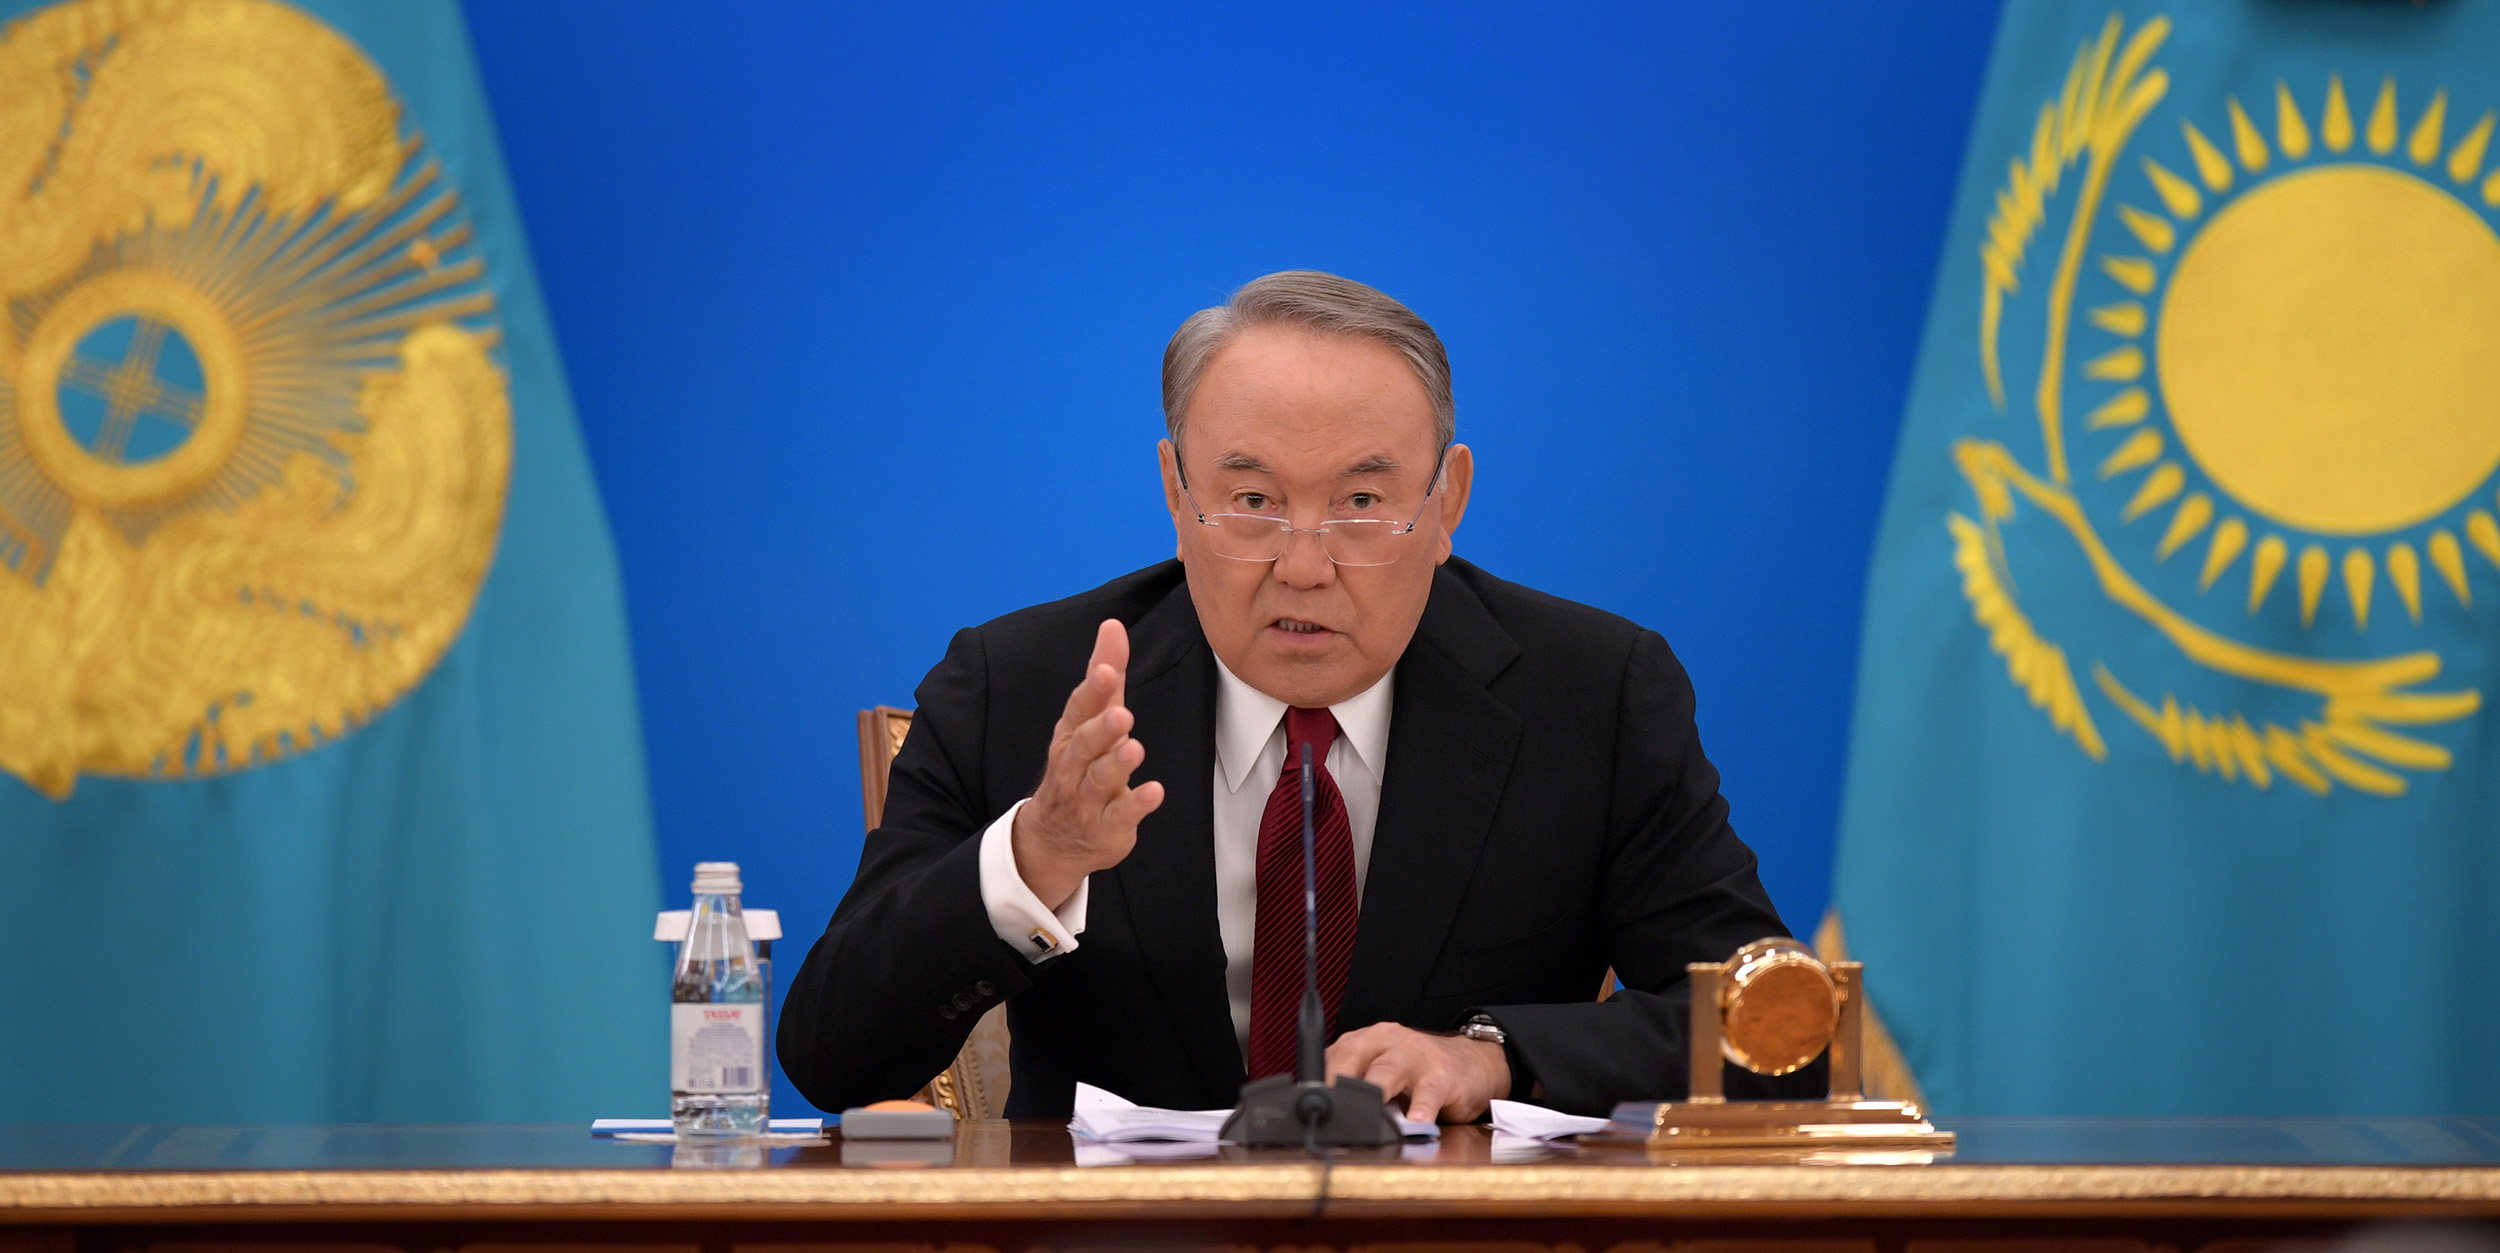 Growing welfare of Kazakh citizens: Increase in income and quality of life - Full text of State of the National Address by President Nursultan Nazarbayev